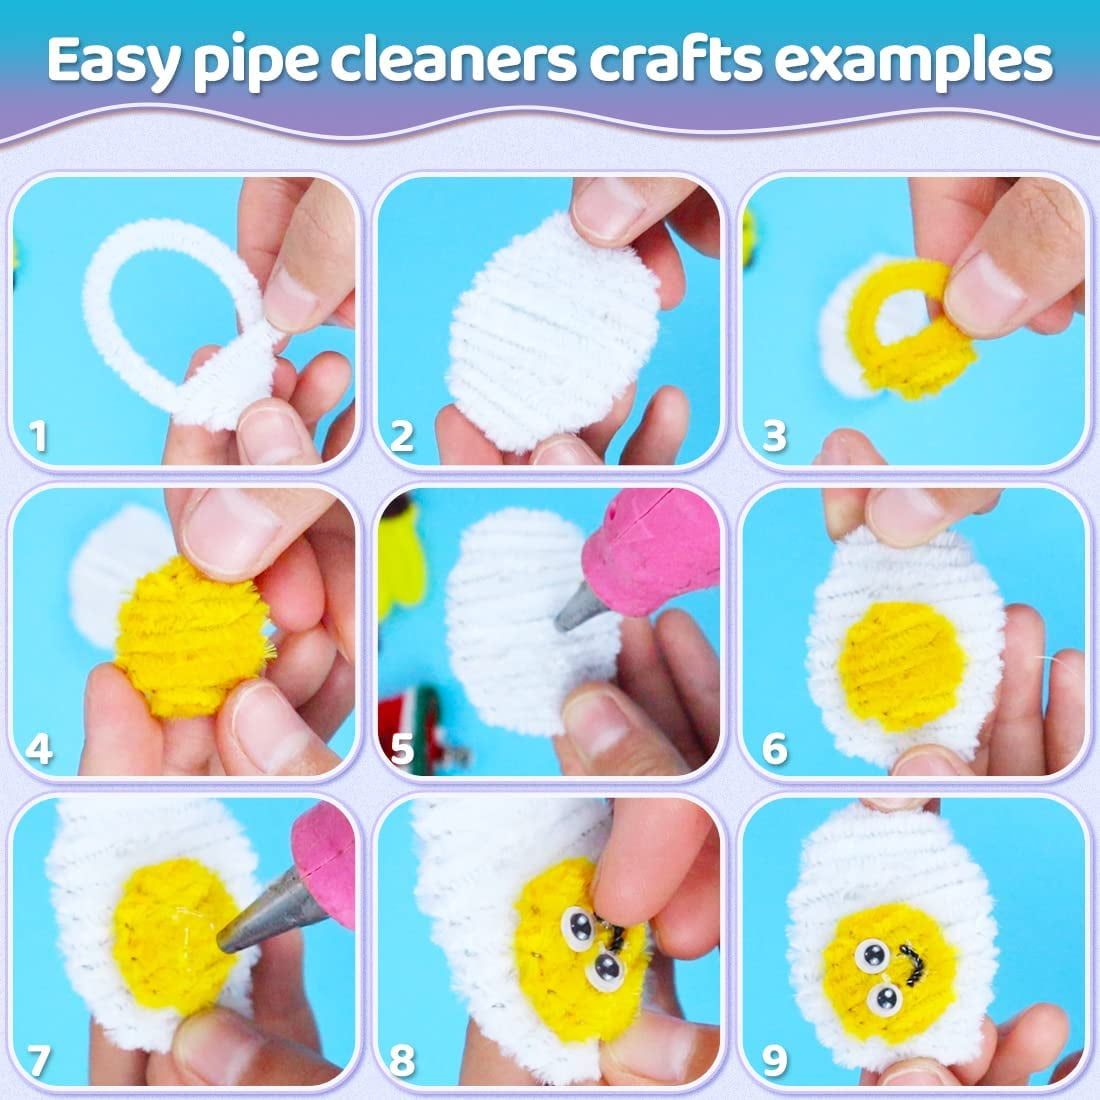 How to Dye Pipe Cleaners for Crafts - DIY Tutorial – Smile